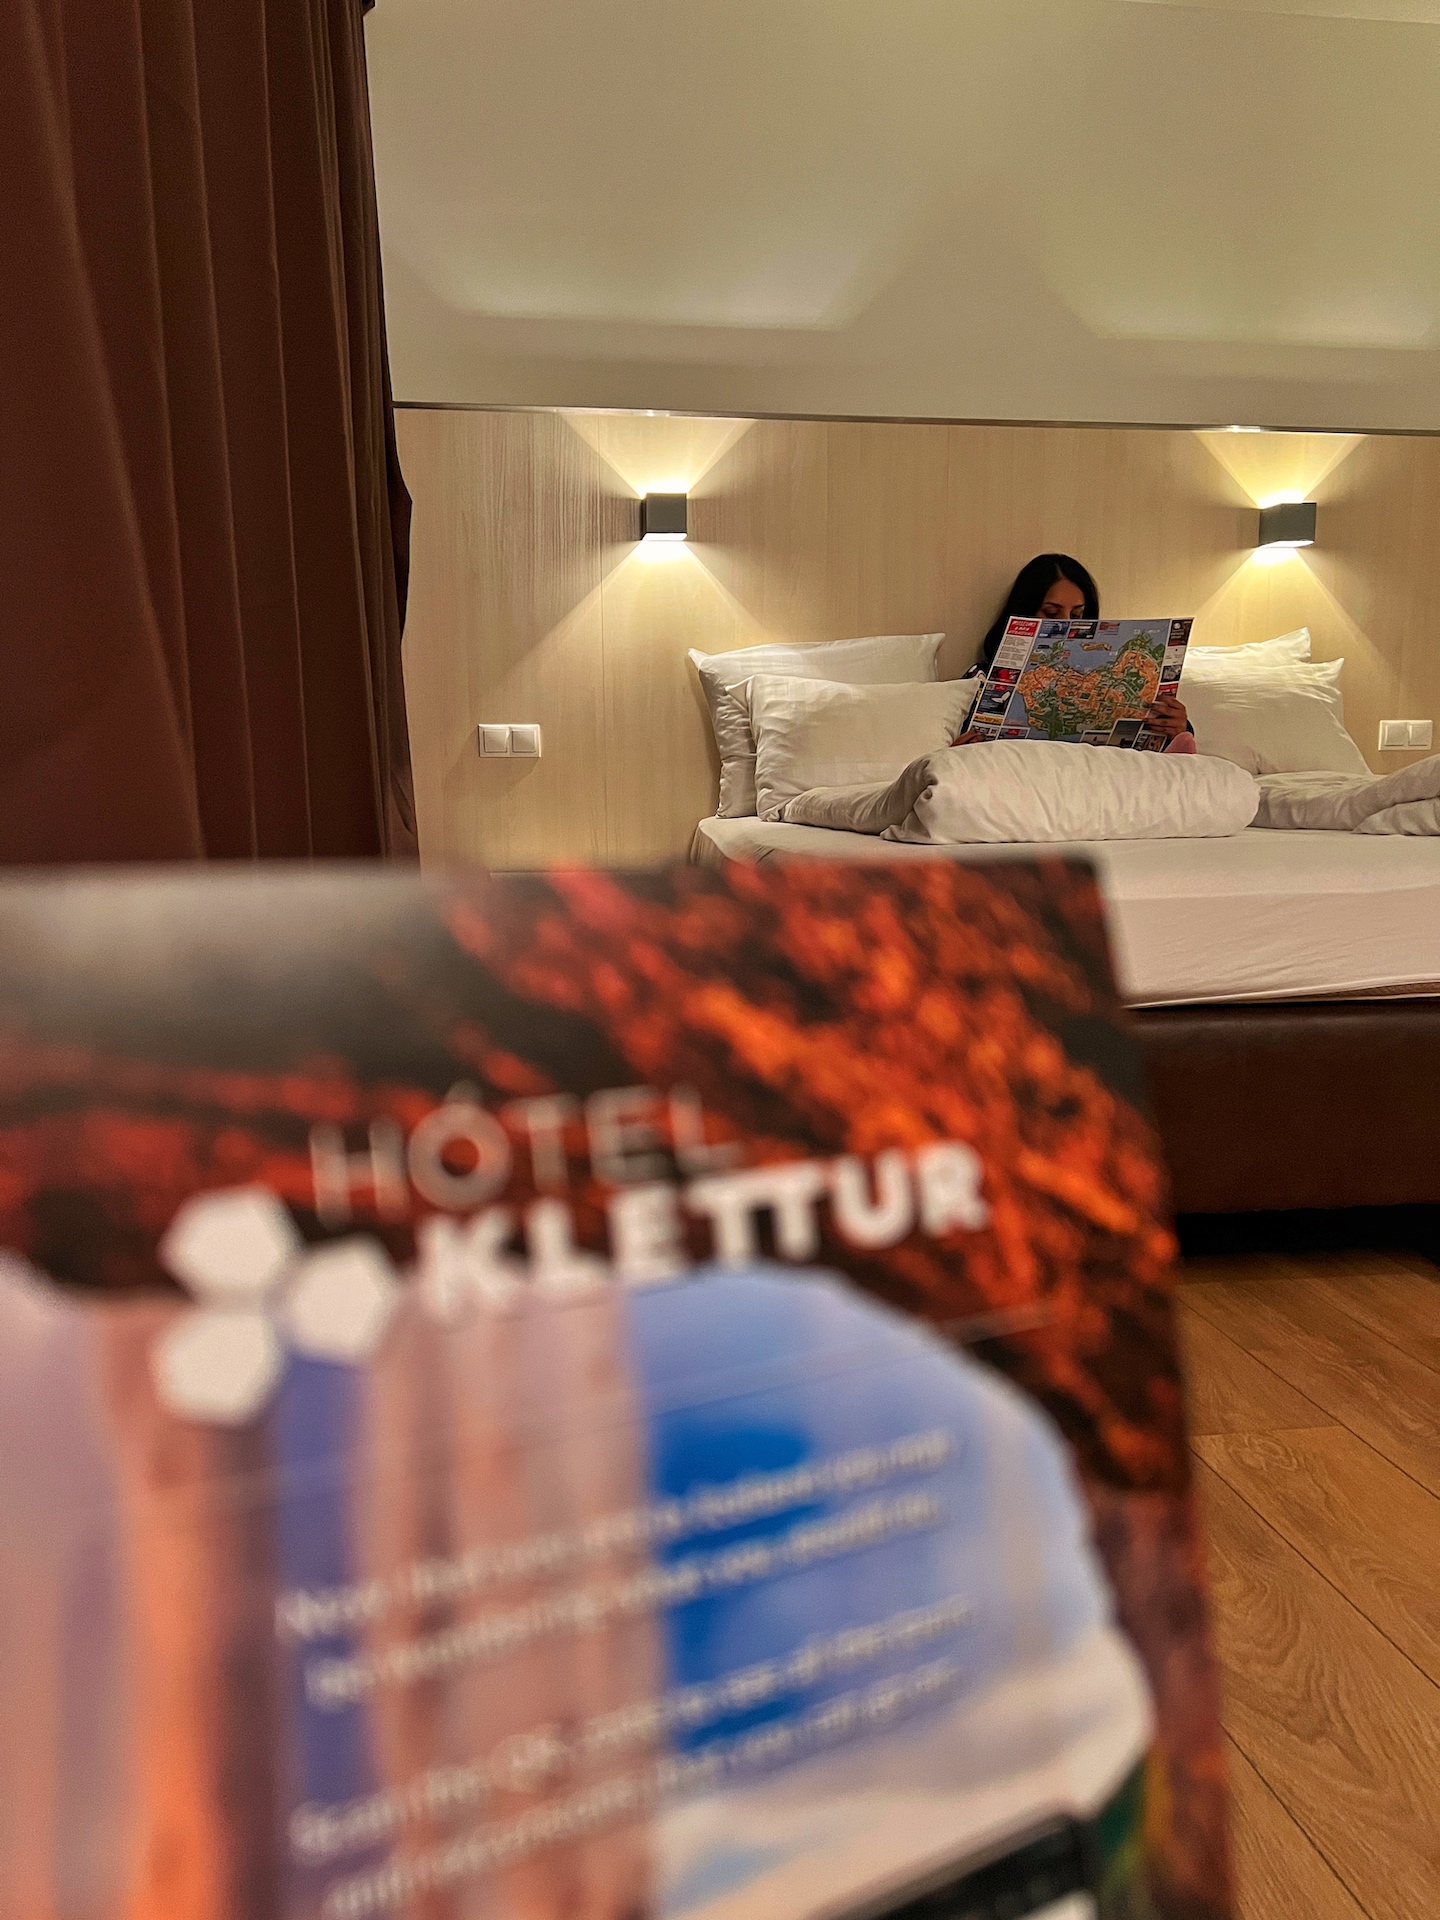 The perfect hotel in Iceland – a review of Hotel Klettur, Reykjavik